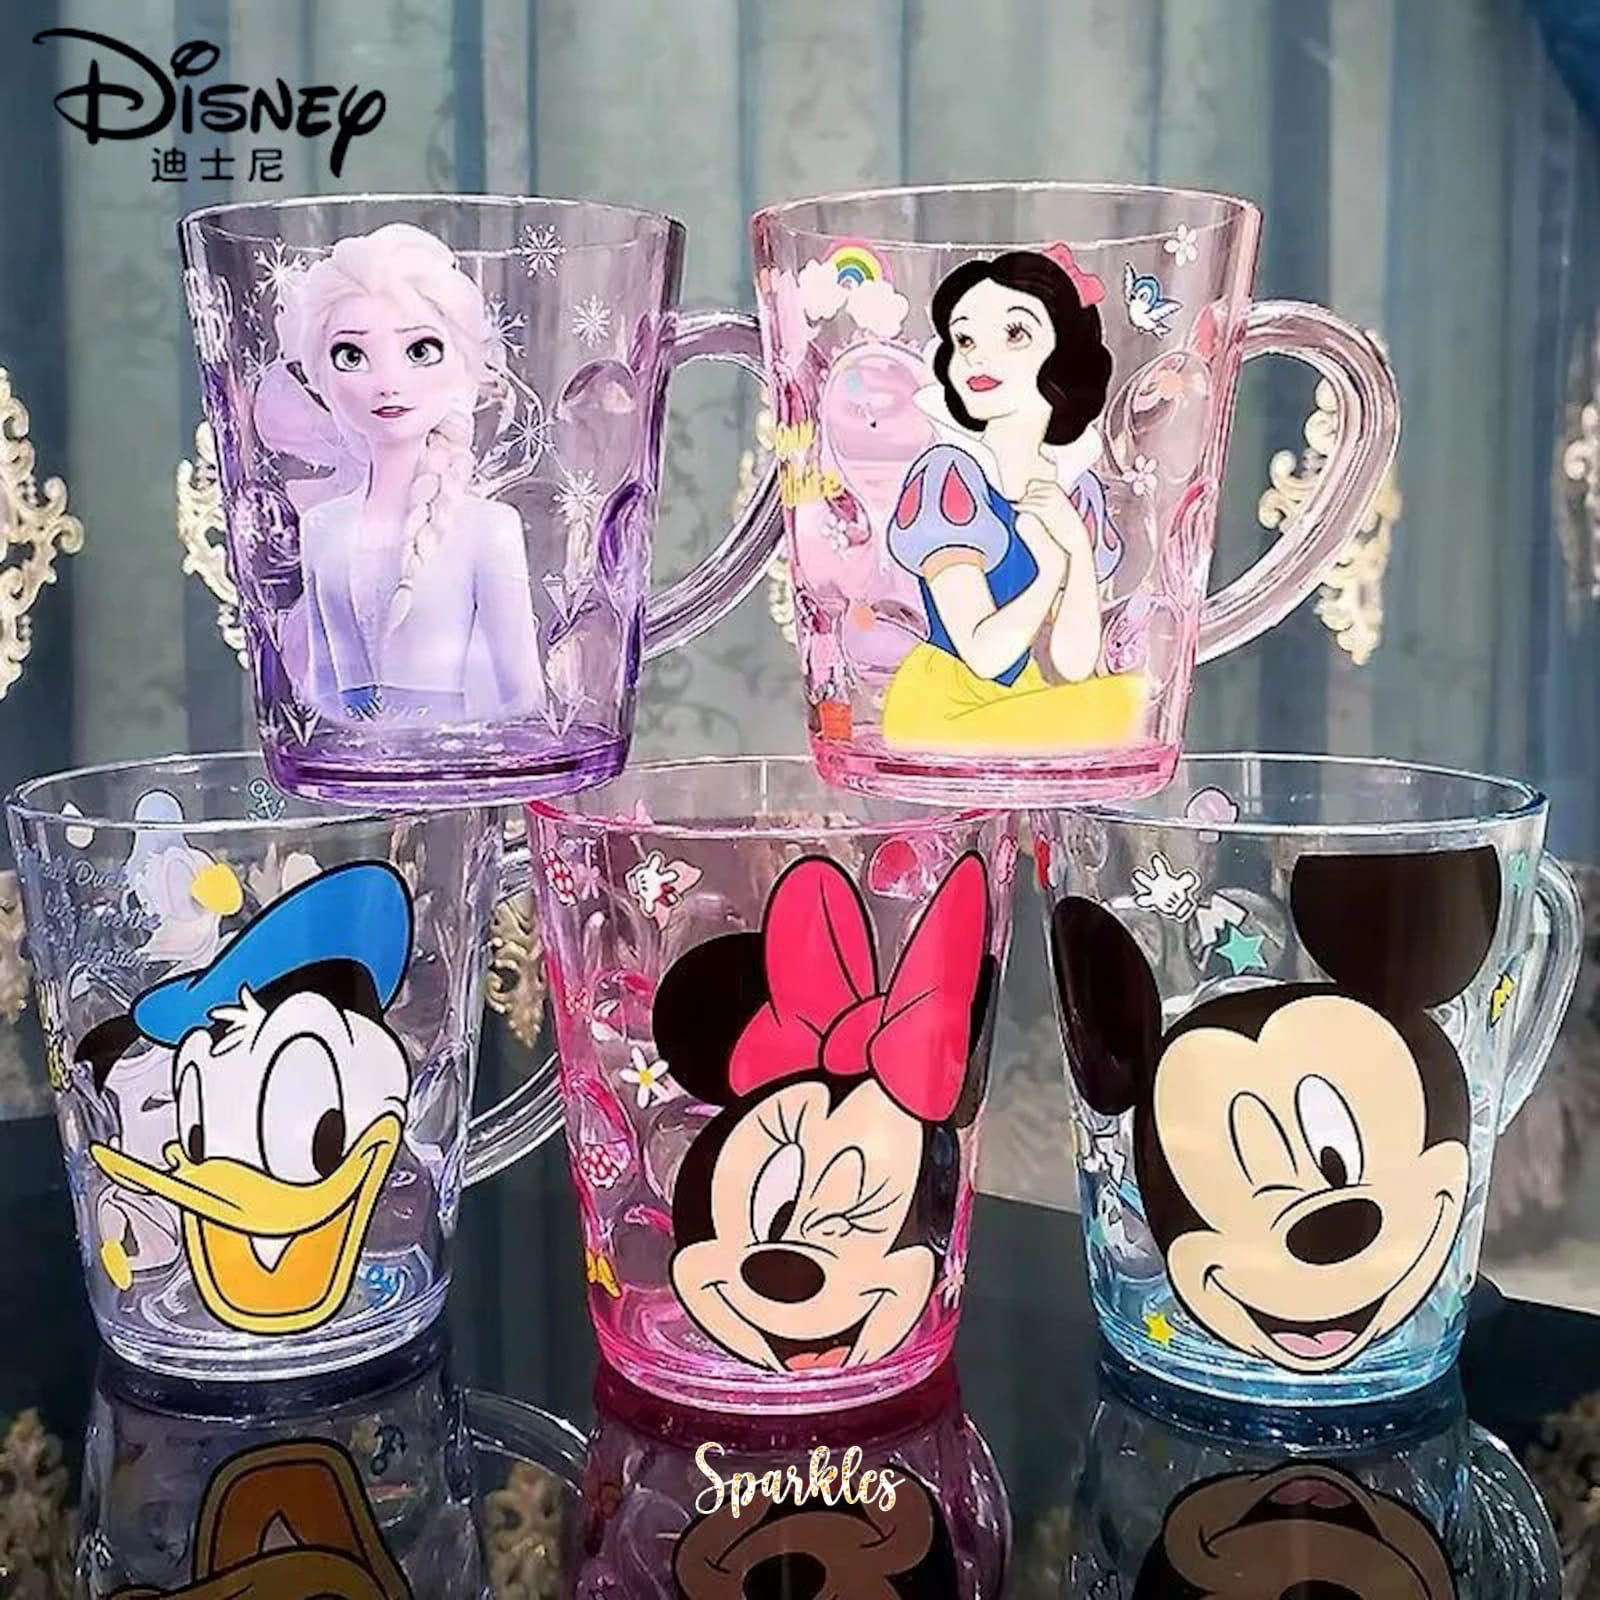 ADORABLE CHARACTER CUP